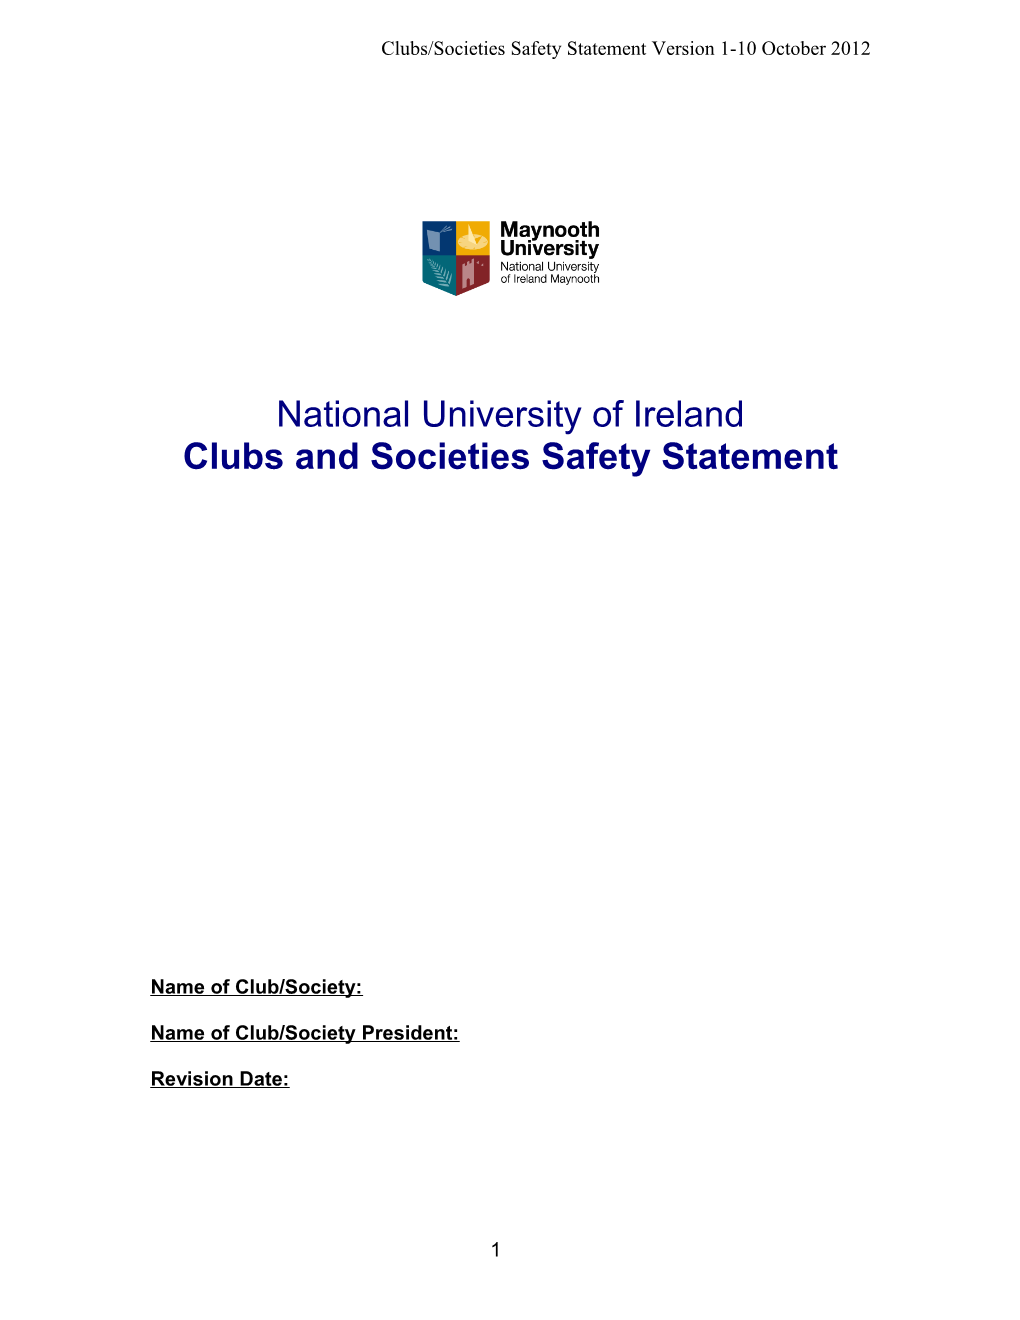 Clubs and Societies Safety Statement Template